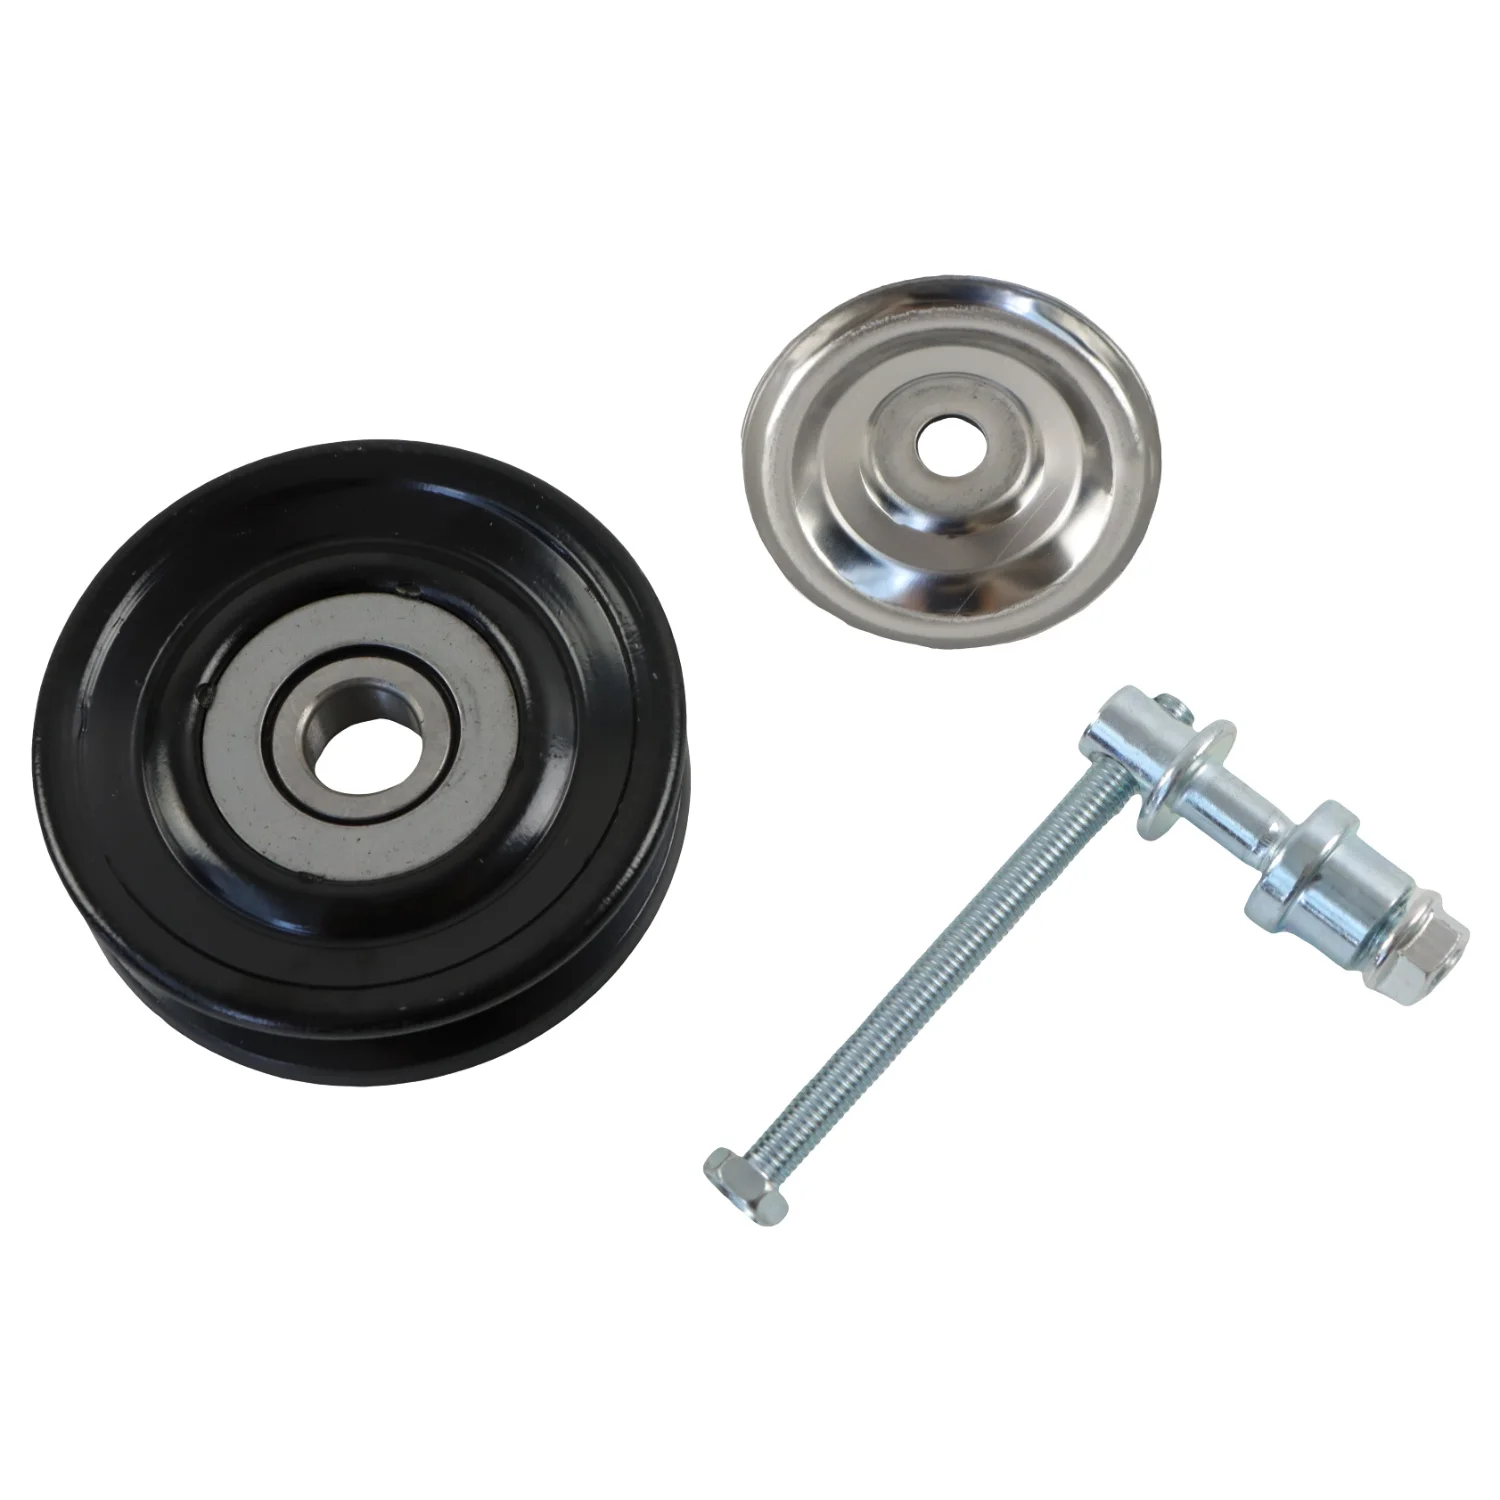 

Pulley Serlies Kit For Hitachi Excavator 4346770 8-94399957-0 Aftermarket Parts with 3 Month Warranty